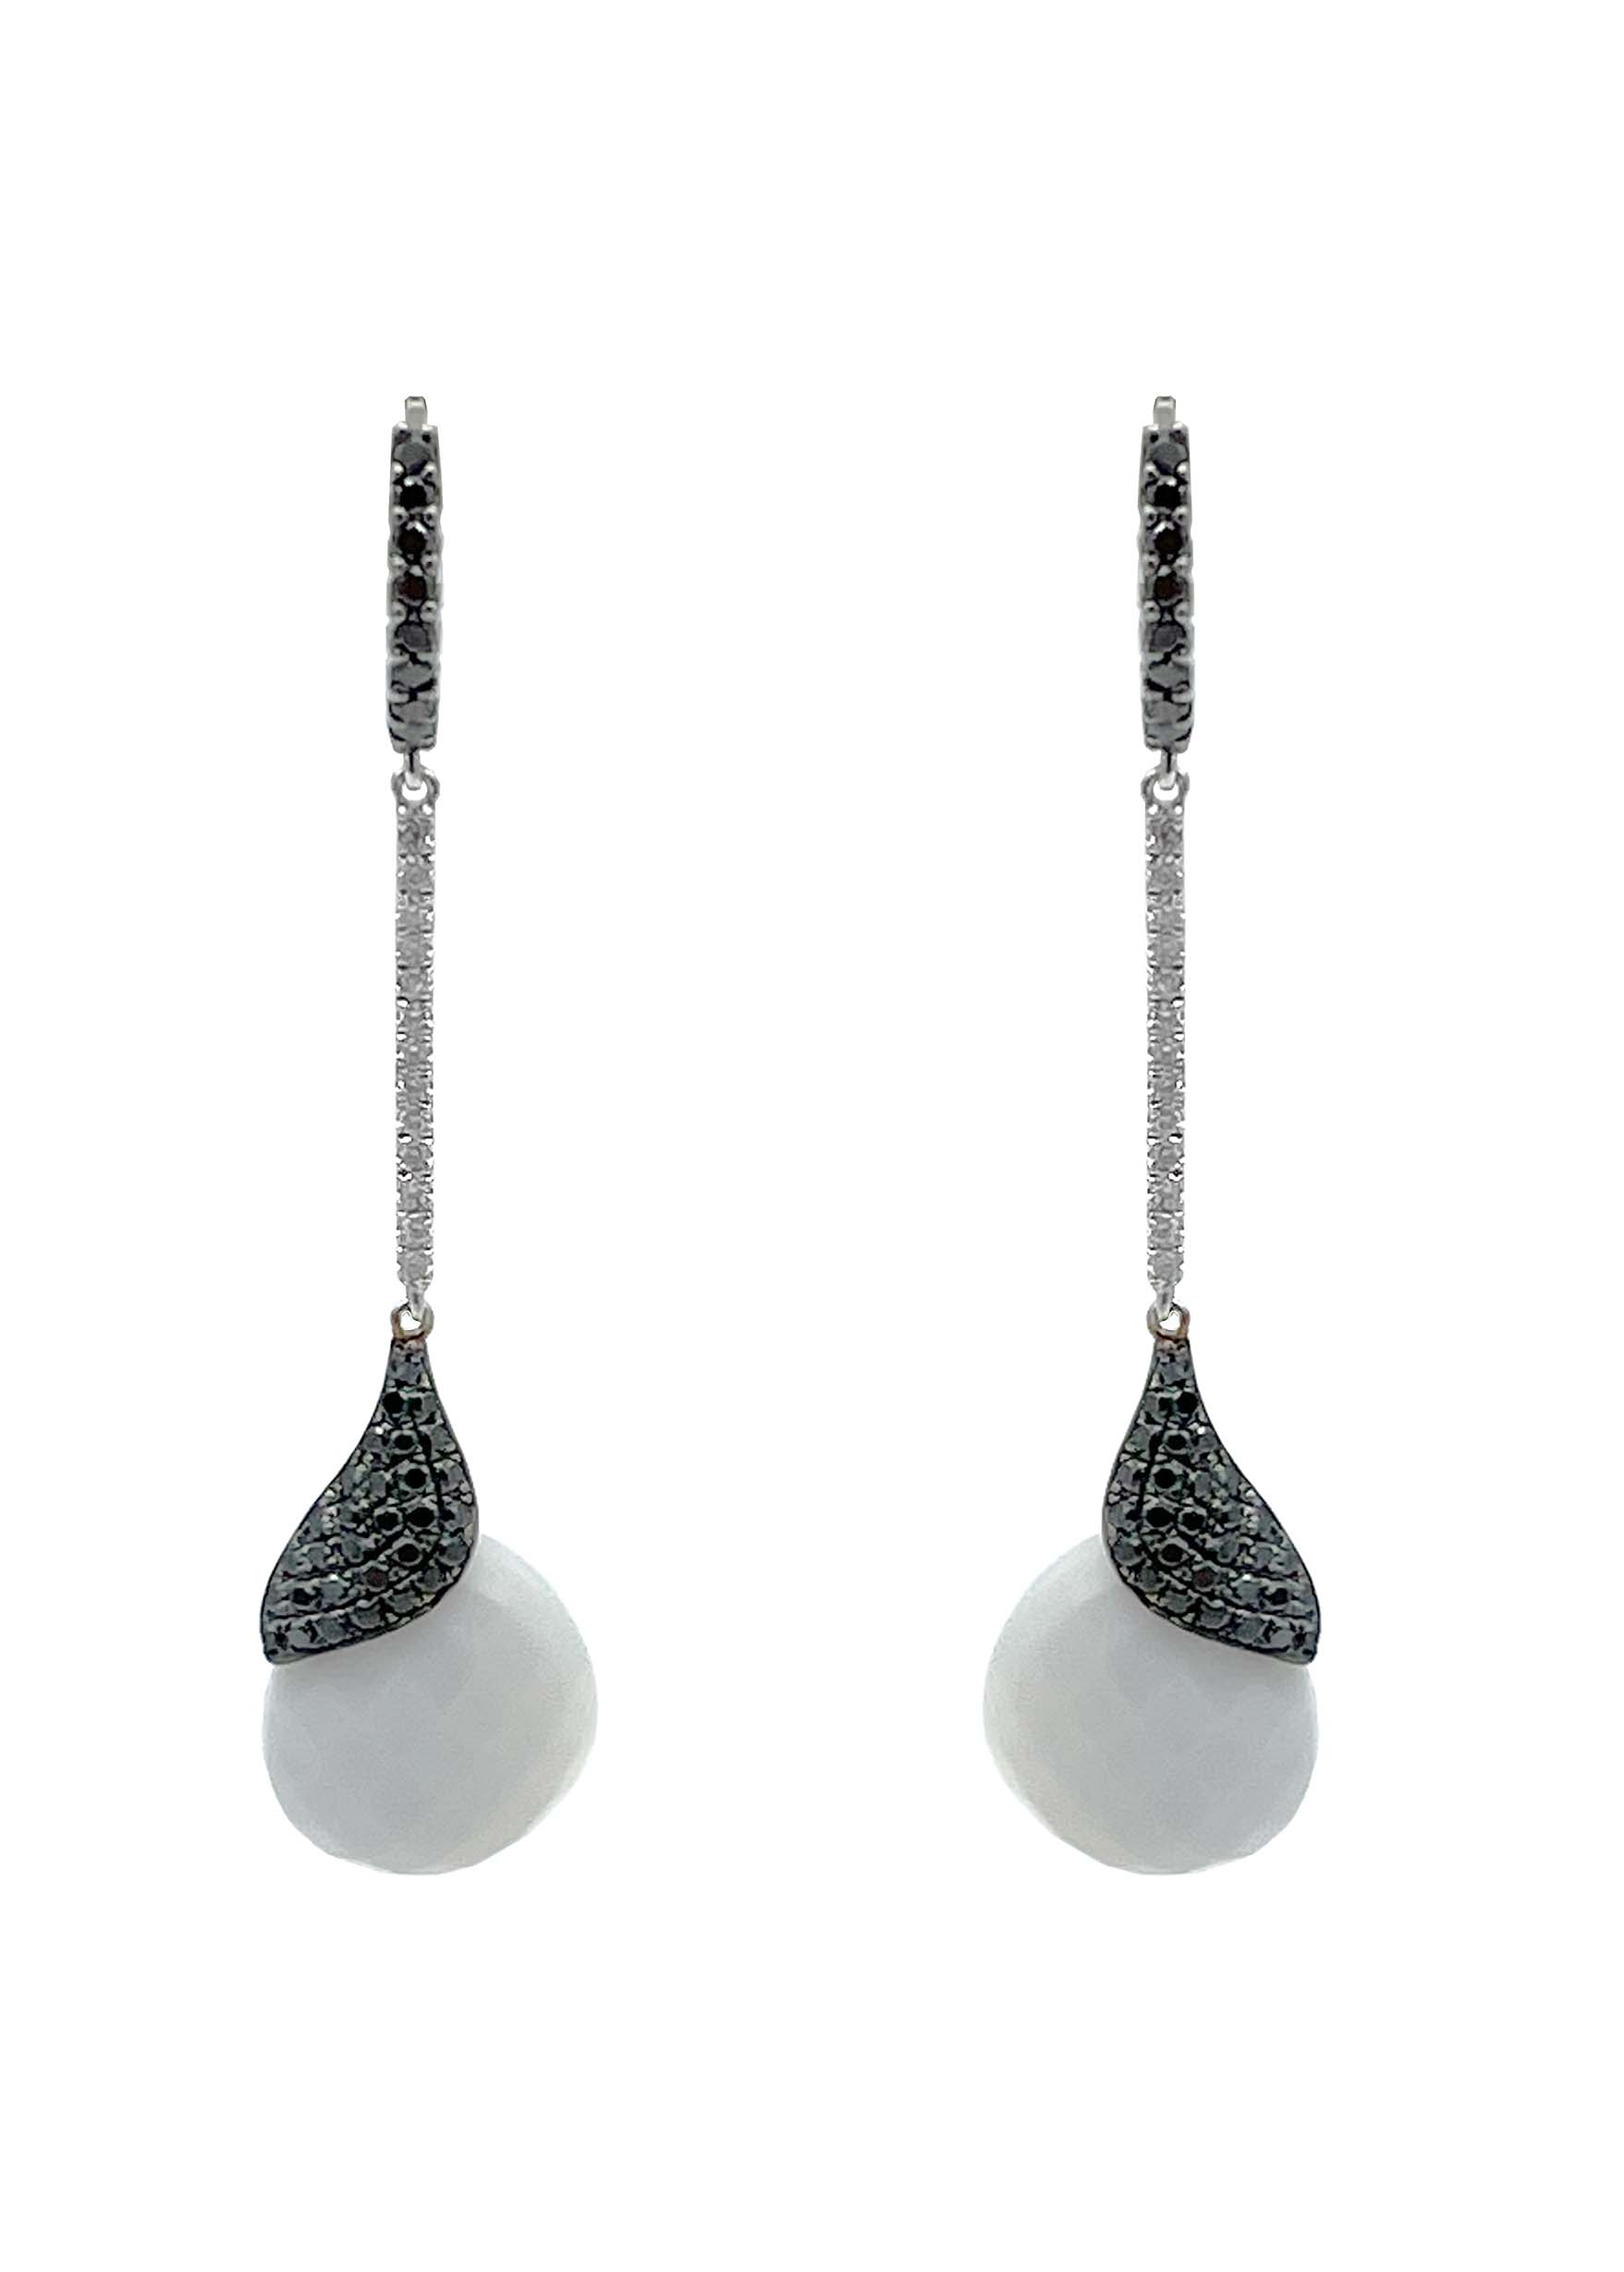 18k White and Rose Gold Dangle Earrings with White and Black Diamonds Image